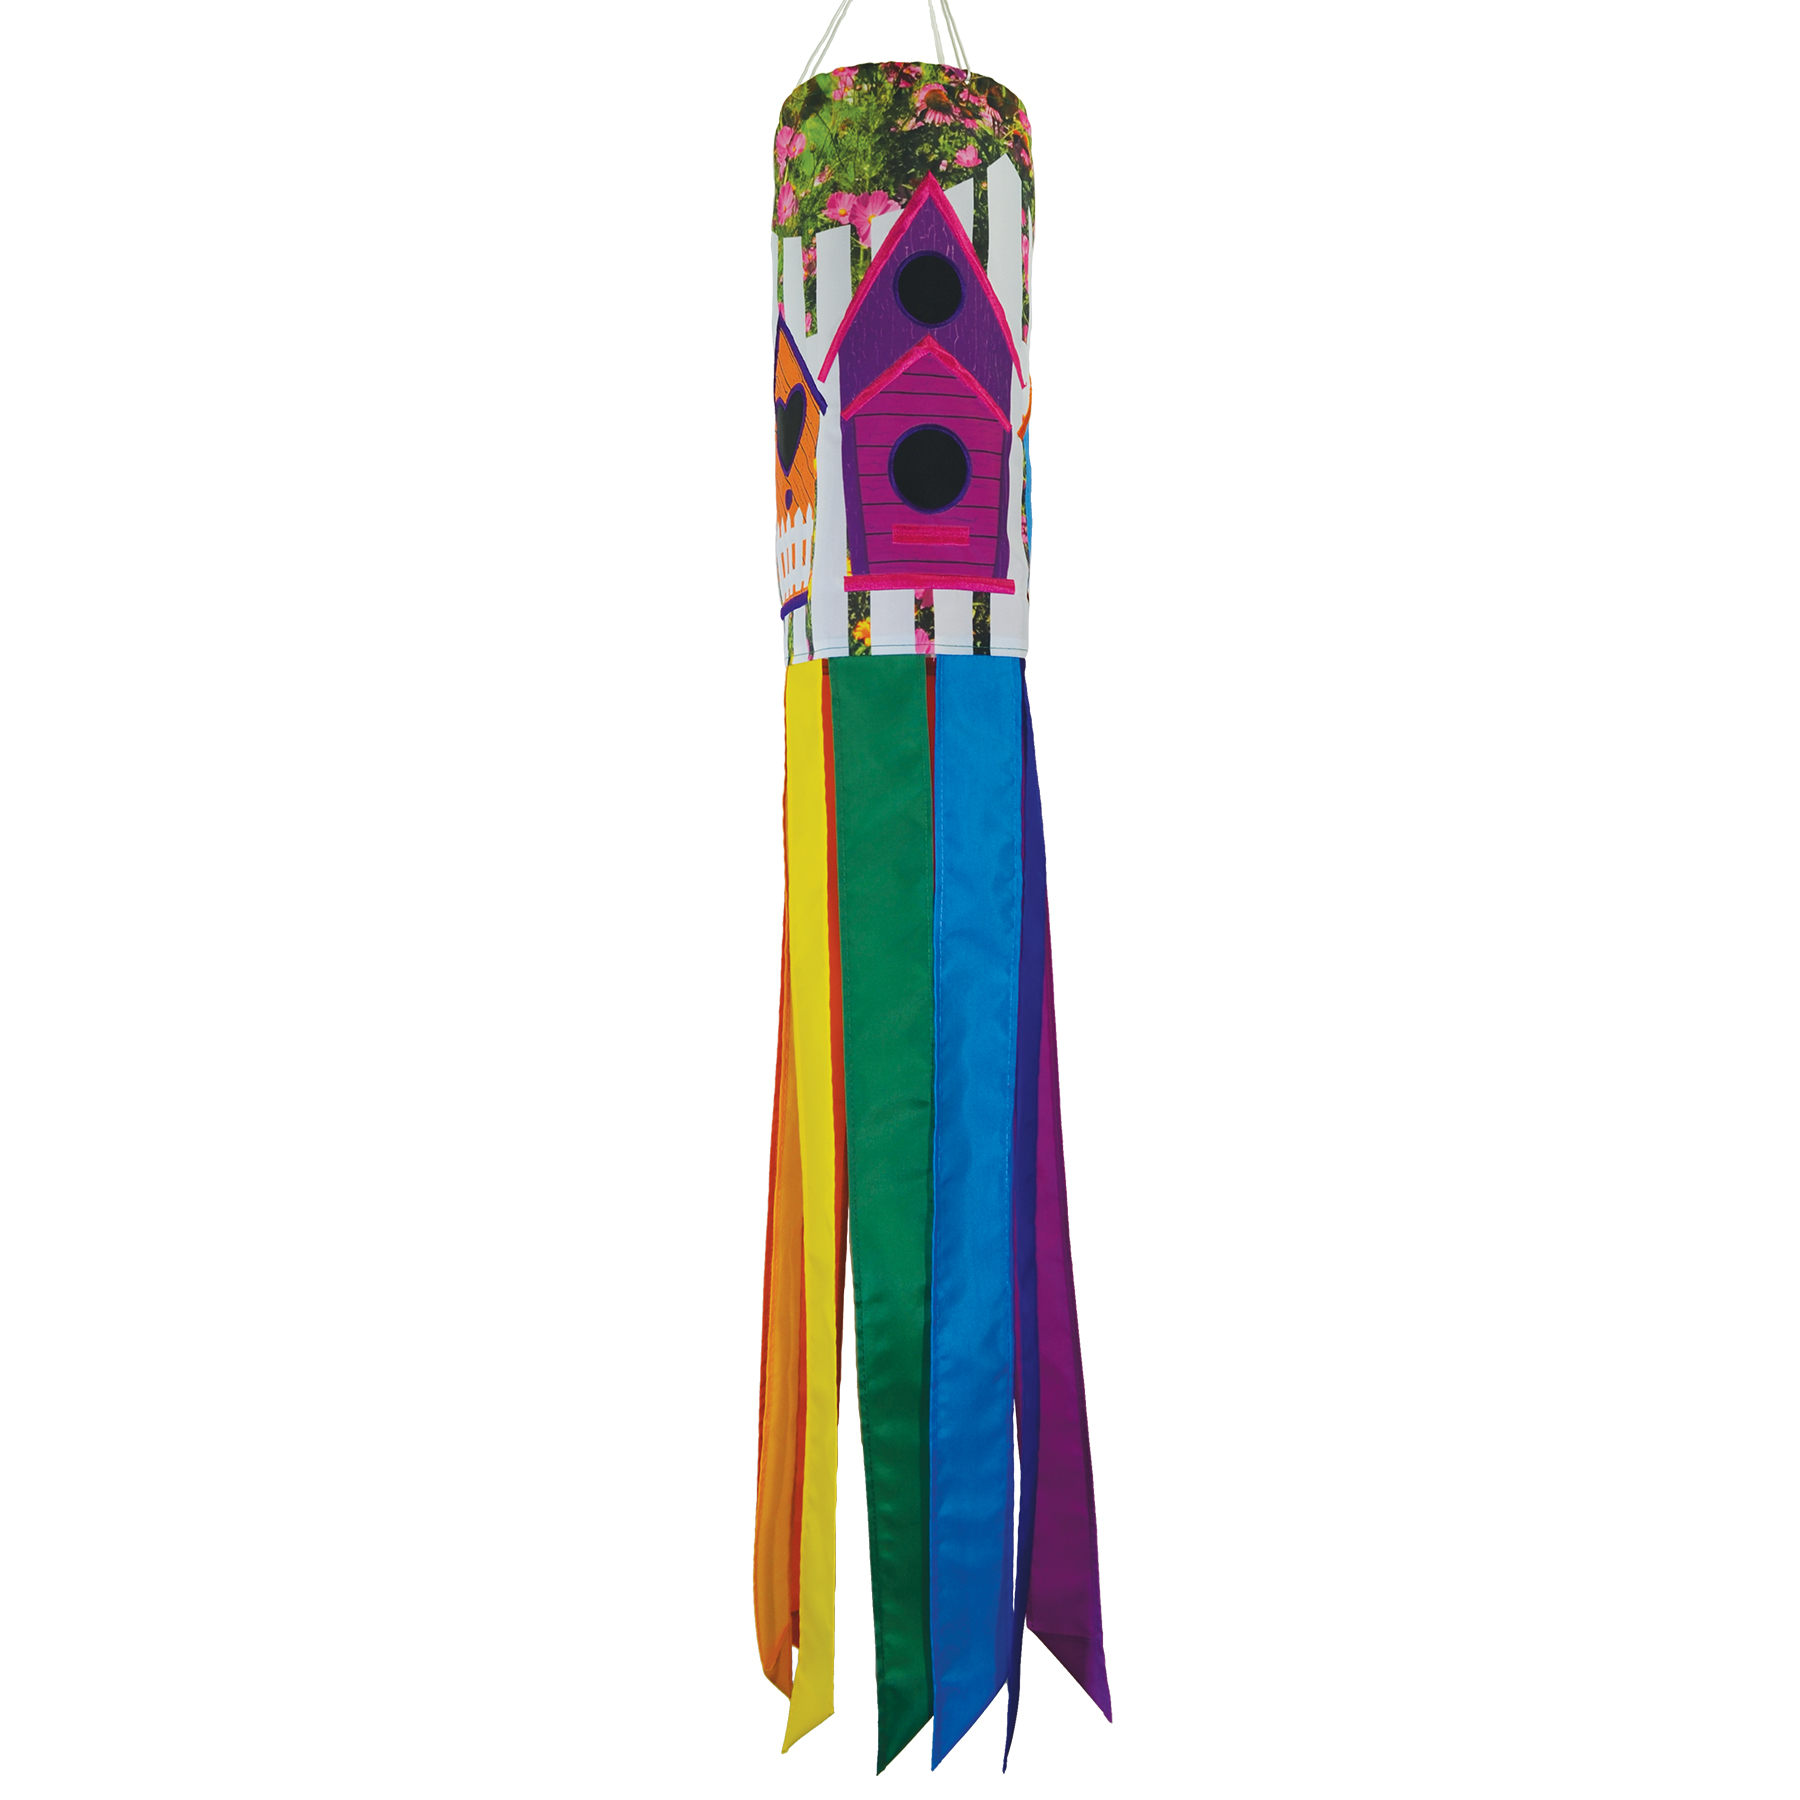 In The Breeze 5072 — Birdhouse Garden 40" Windsock, Colorful Outdoor and Garden Decoration - image 1 of 7